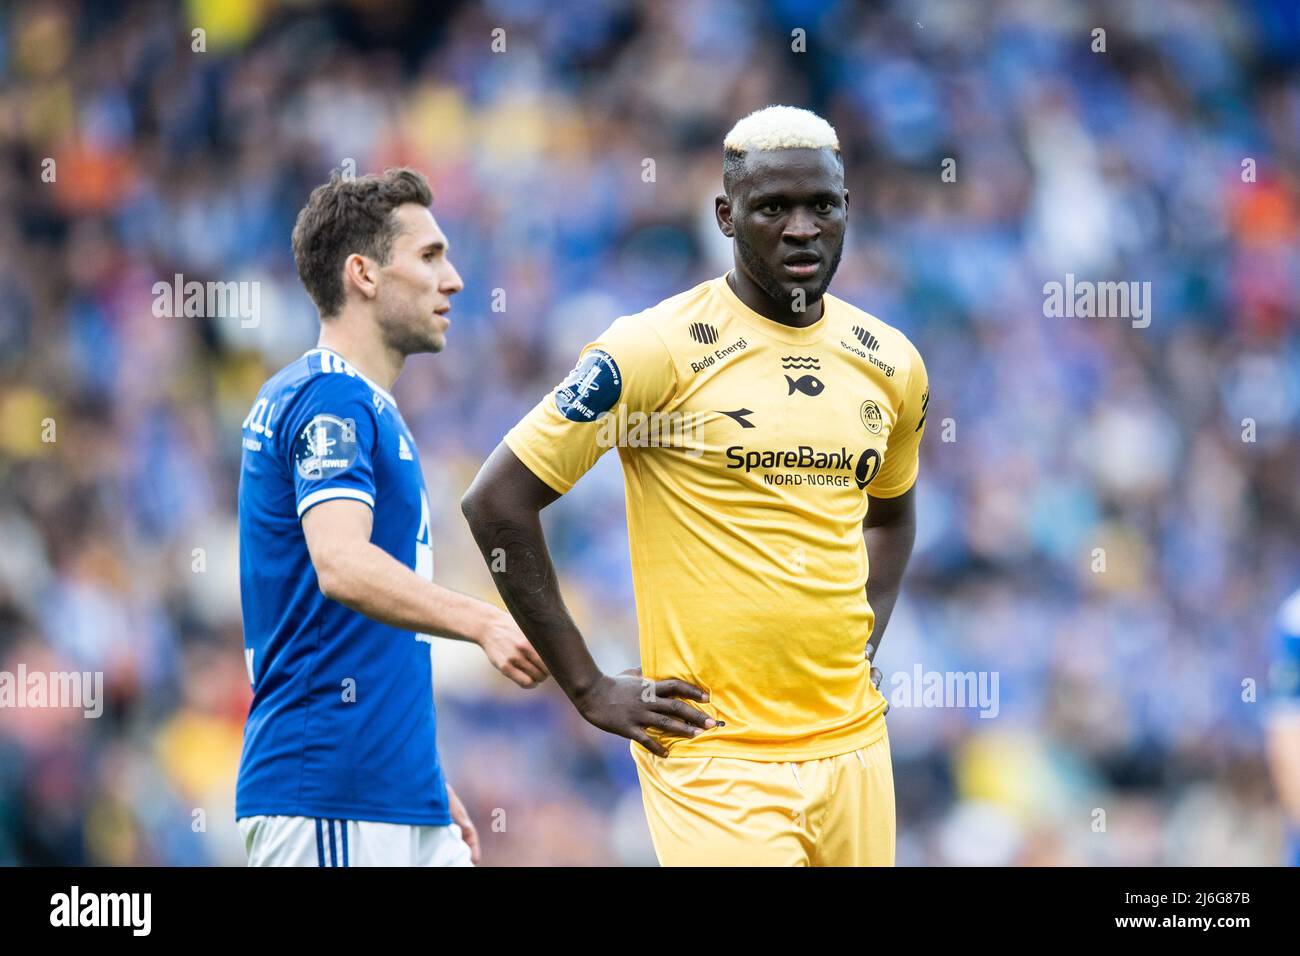 Oslo, Norway. 01st, May 2022. Victor Boniface (8) of Bodoe/Glimt seen in the Norwegian Cup final, the NM Menn final, between Bodoe/Glimt and Molde at Ullevaal Stadion in Oslo. (Photo credit: Gonzales Photo - Jan-Erik Eriksen). Credit: Gonzales Photo/Alamy Live News Stock Photo